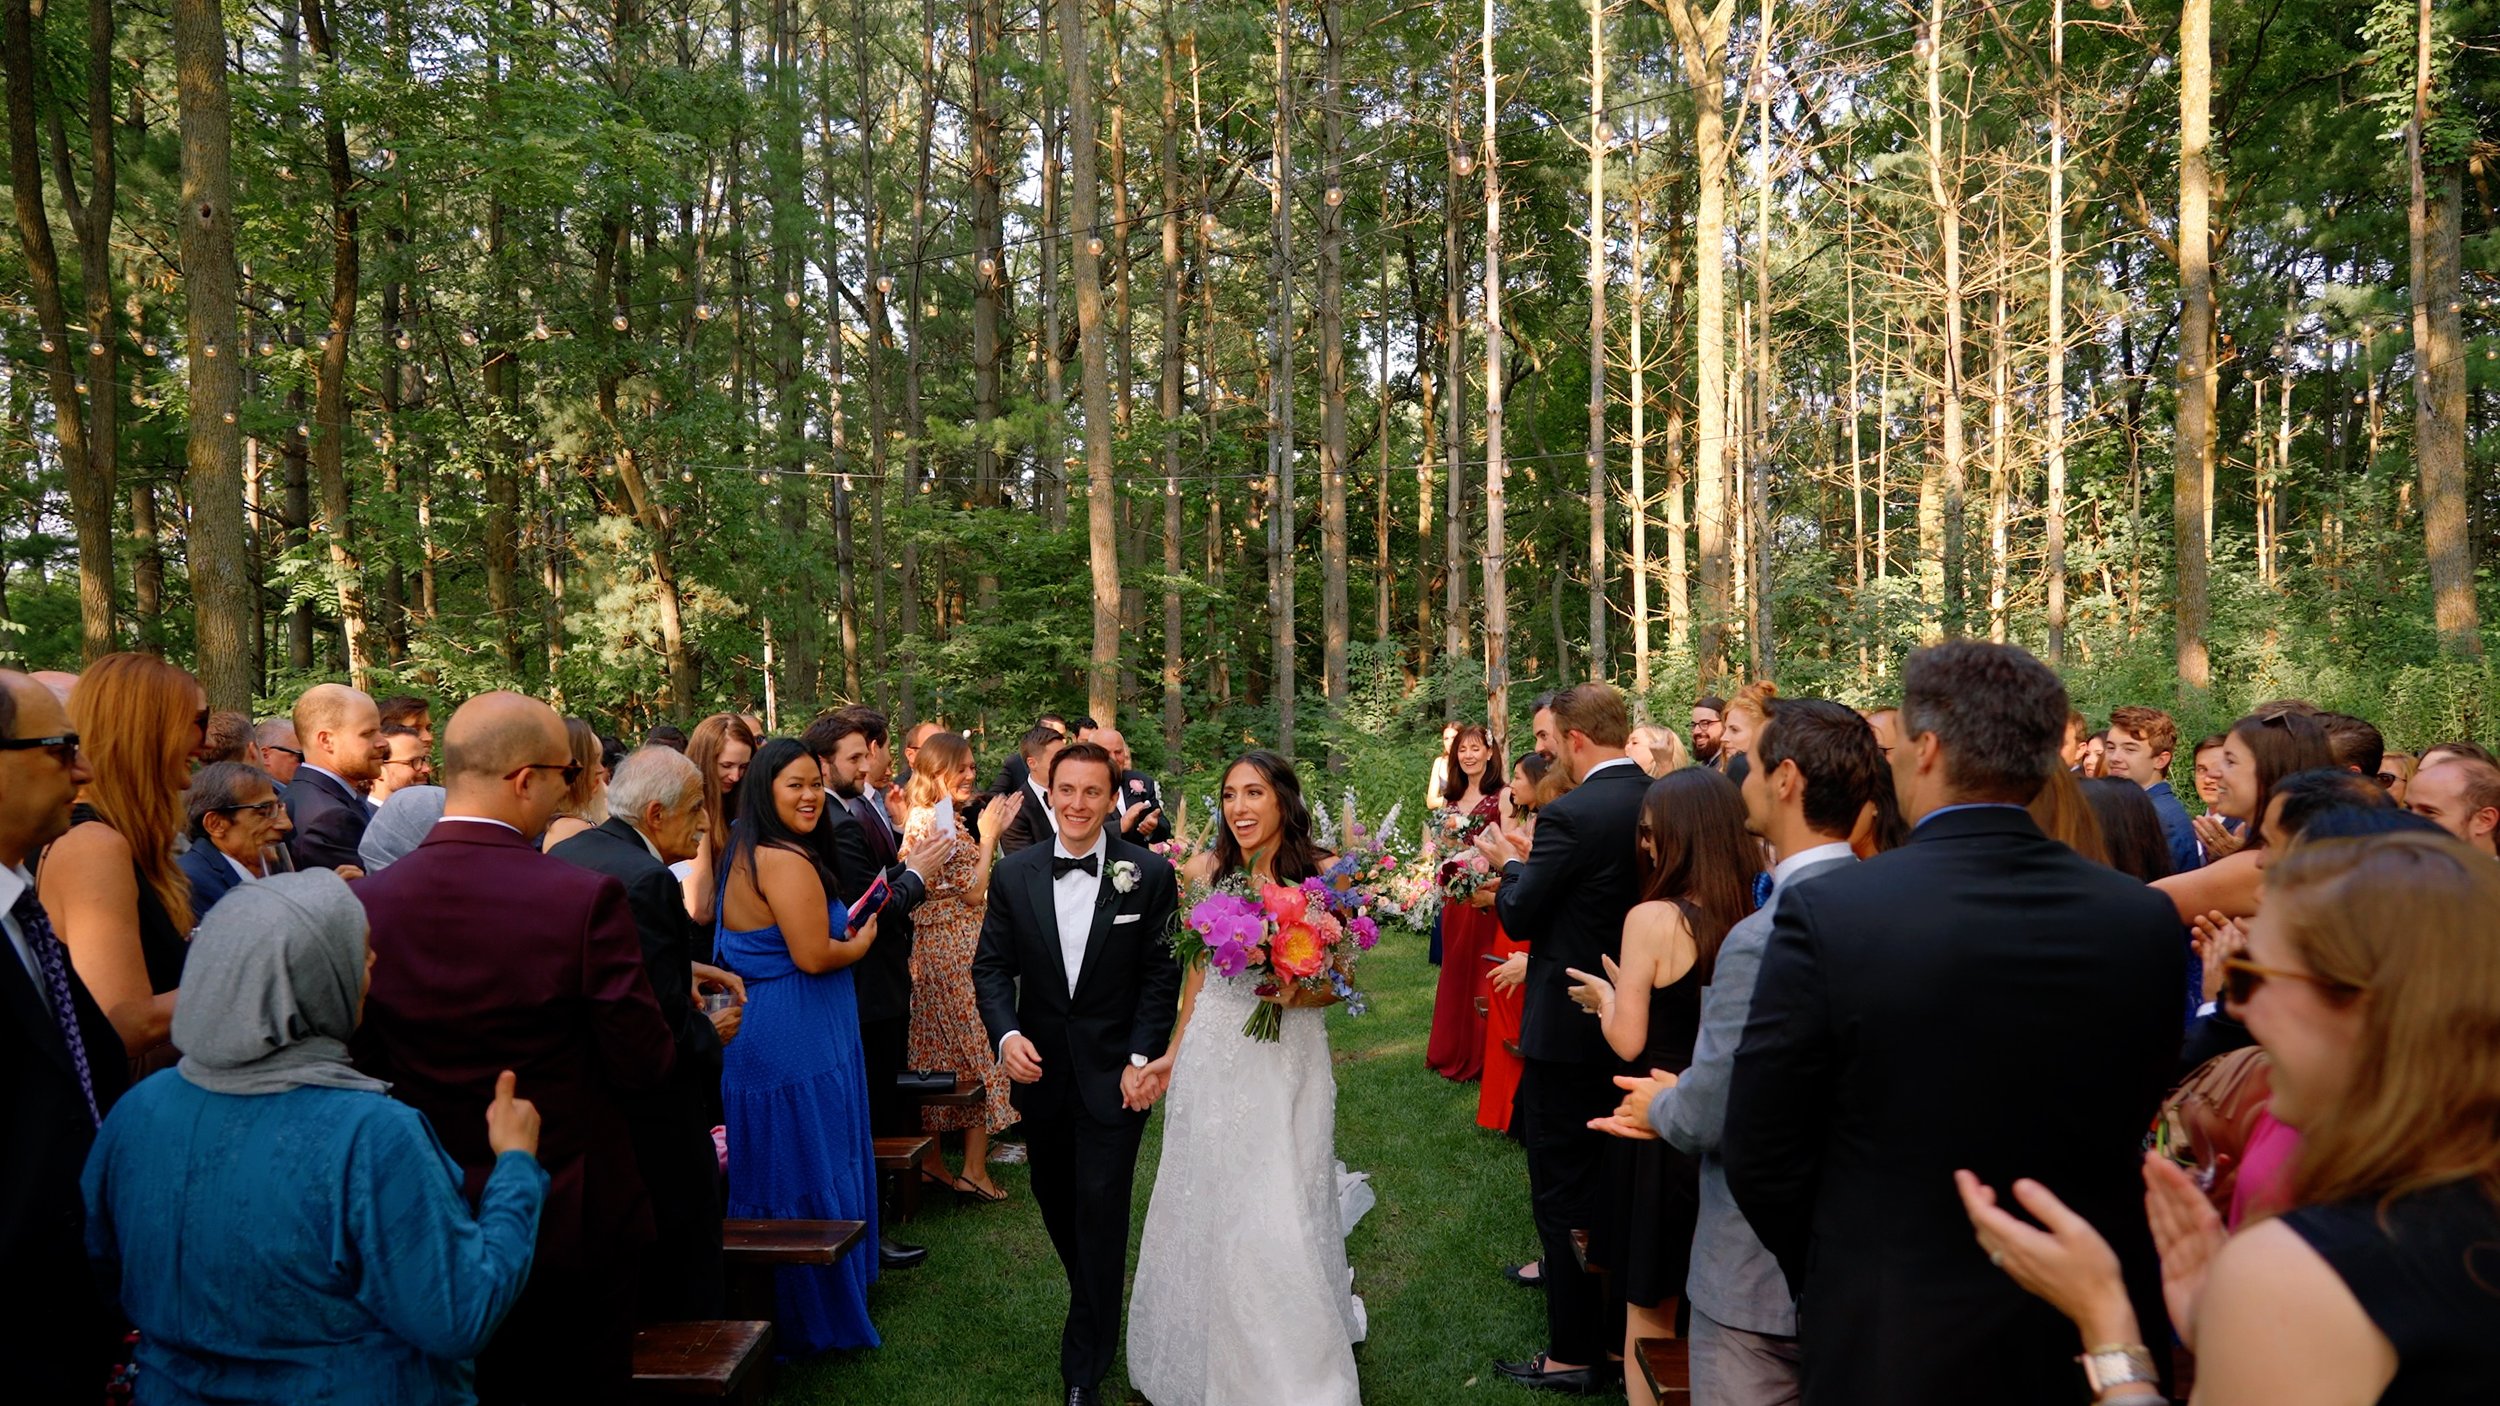 Woodland Forest Outdoor Ceremony at Oak Hill Farm